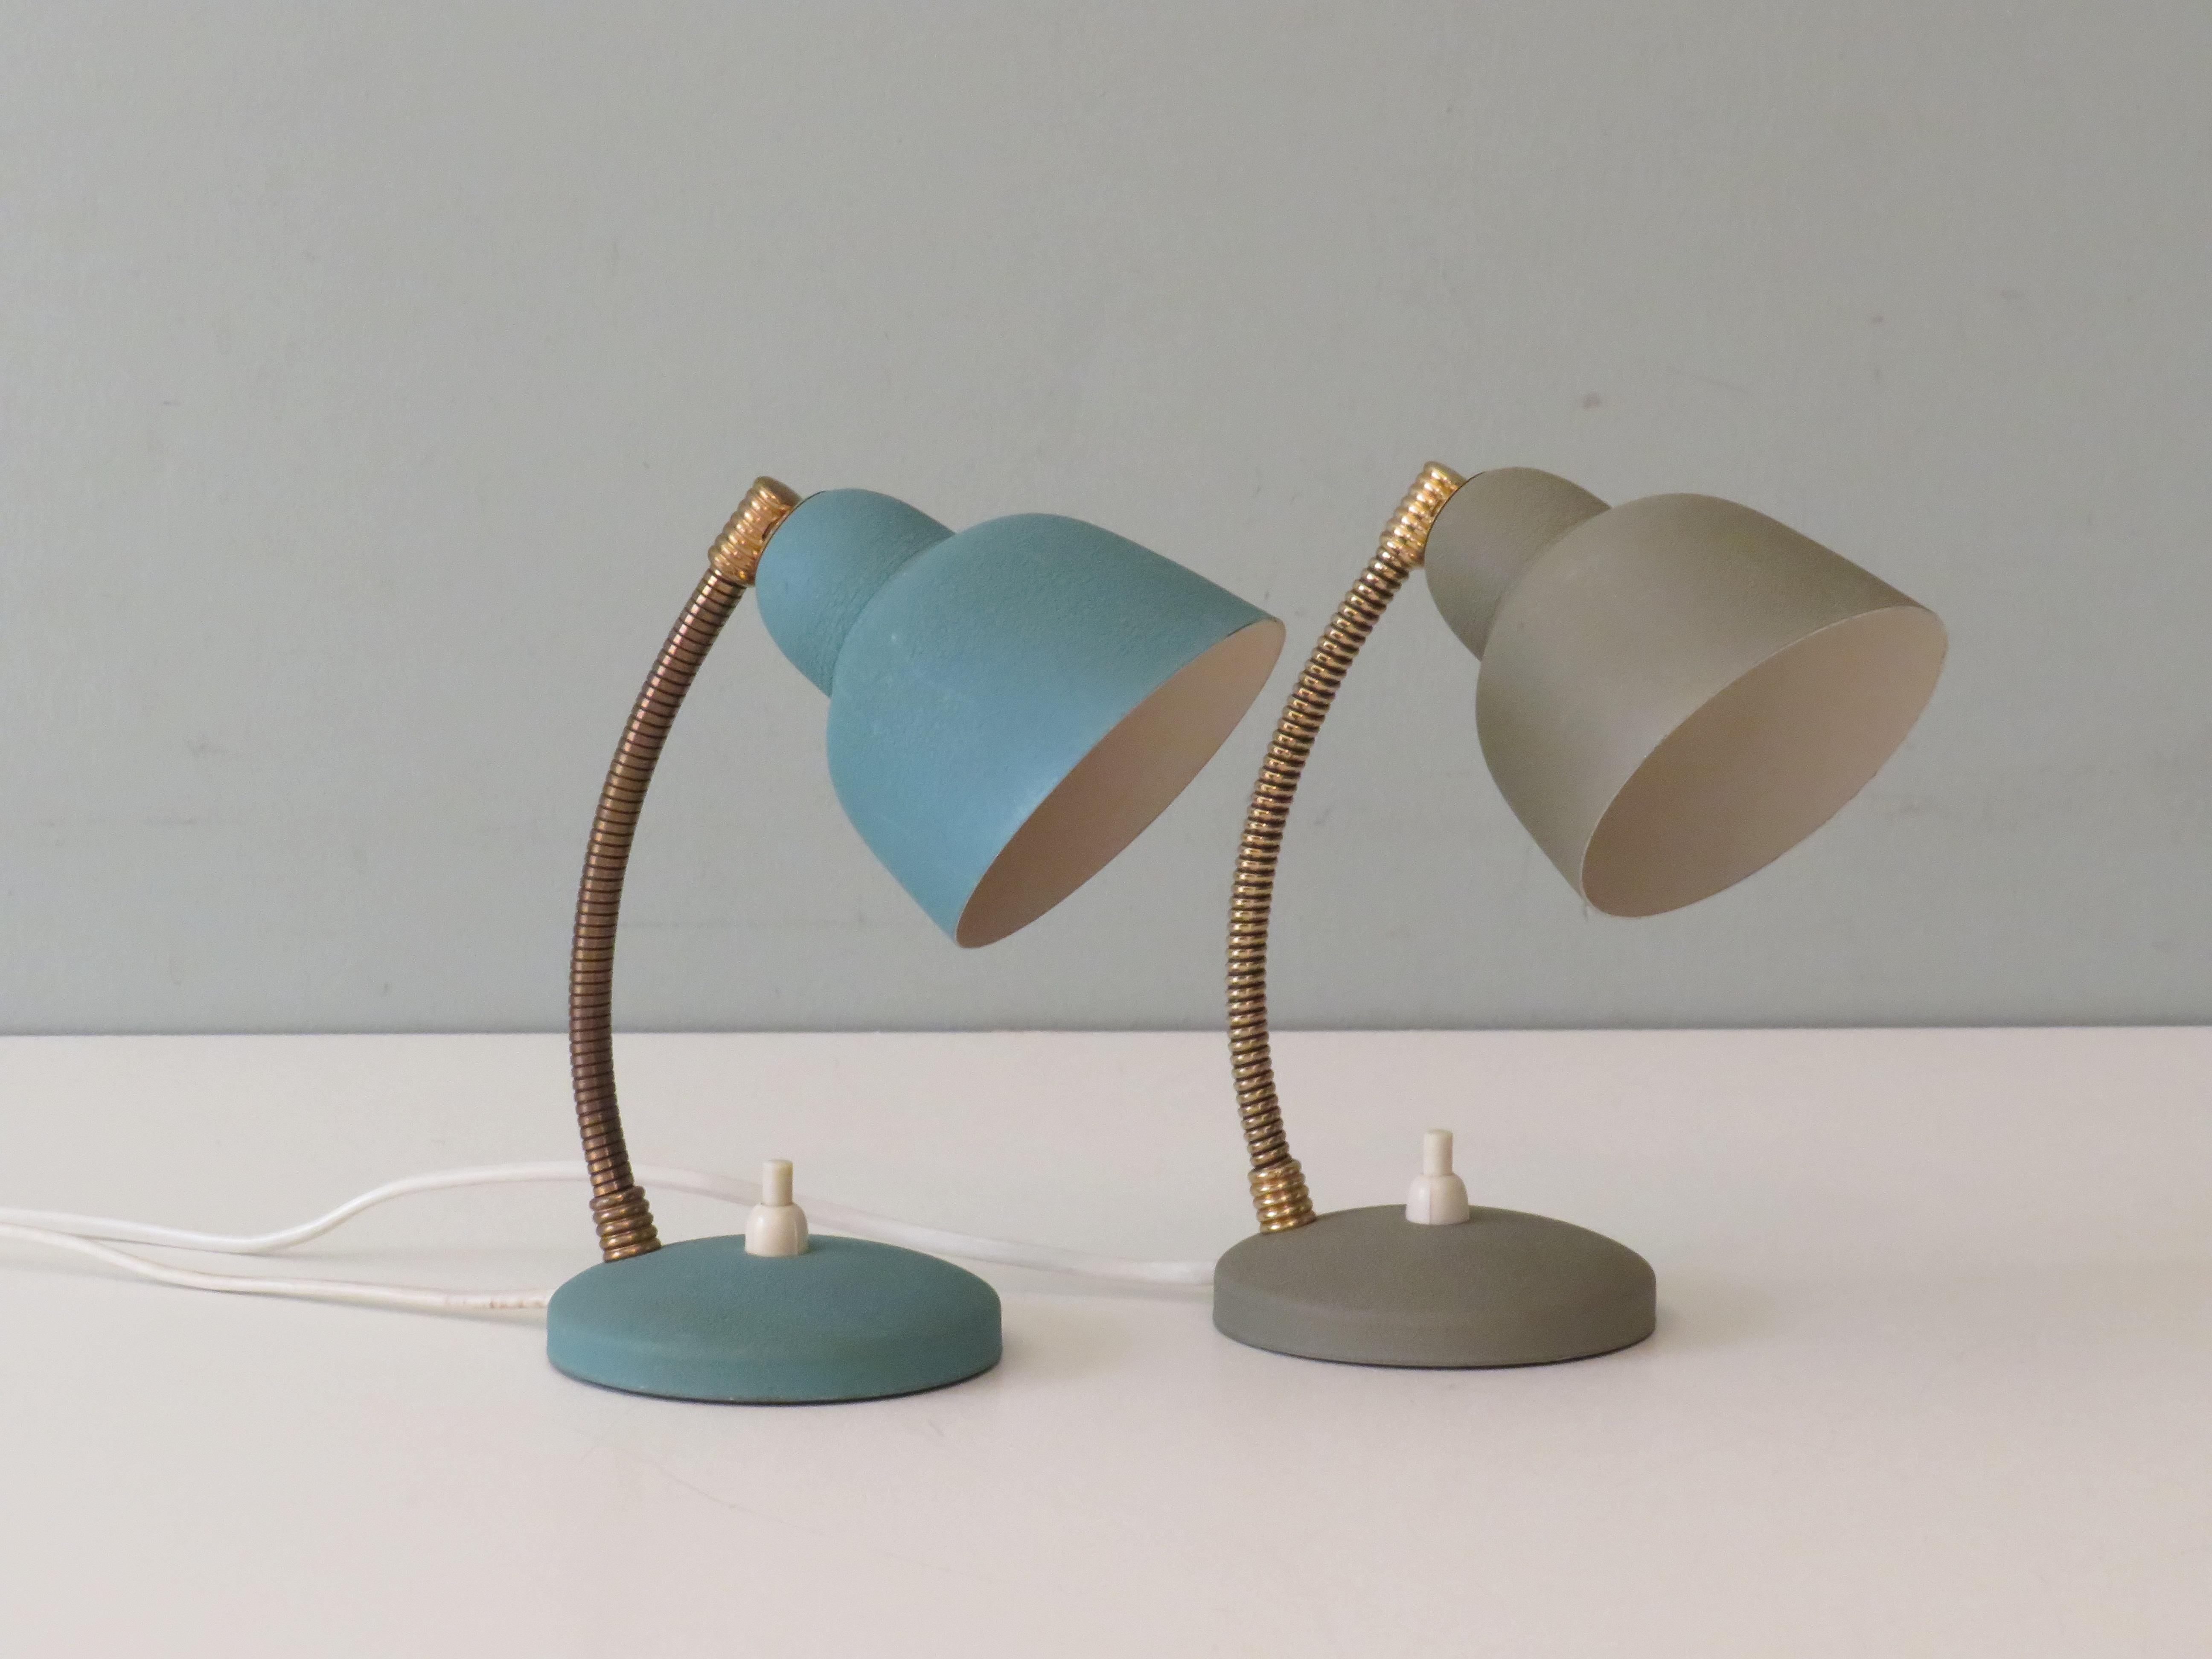 2 Desk Lamps - Bedside Lamps from Aluminor, France 1950 1